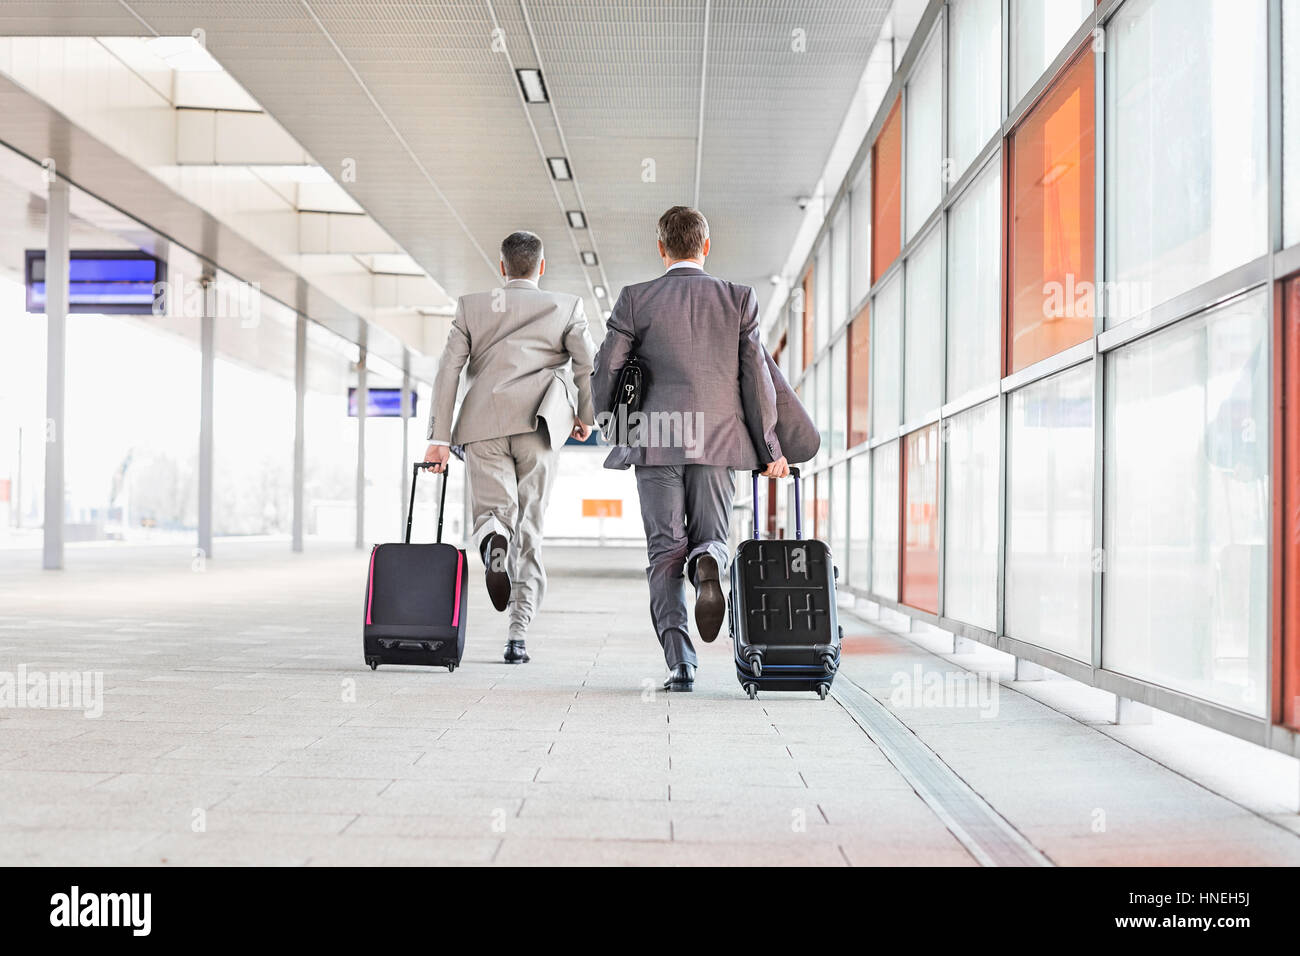 Full length rear view of businessmen with luggage running on railroad platform Stock Photo